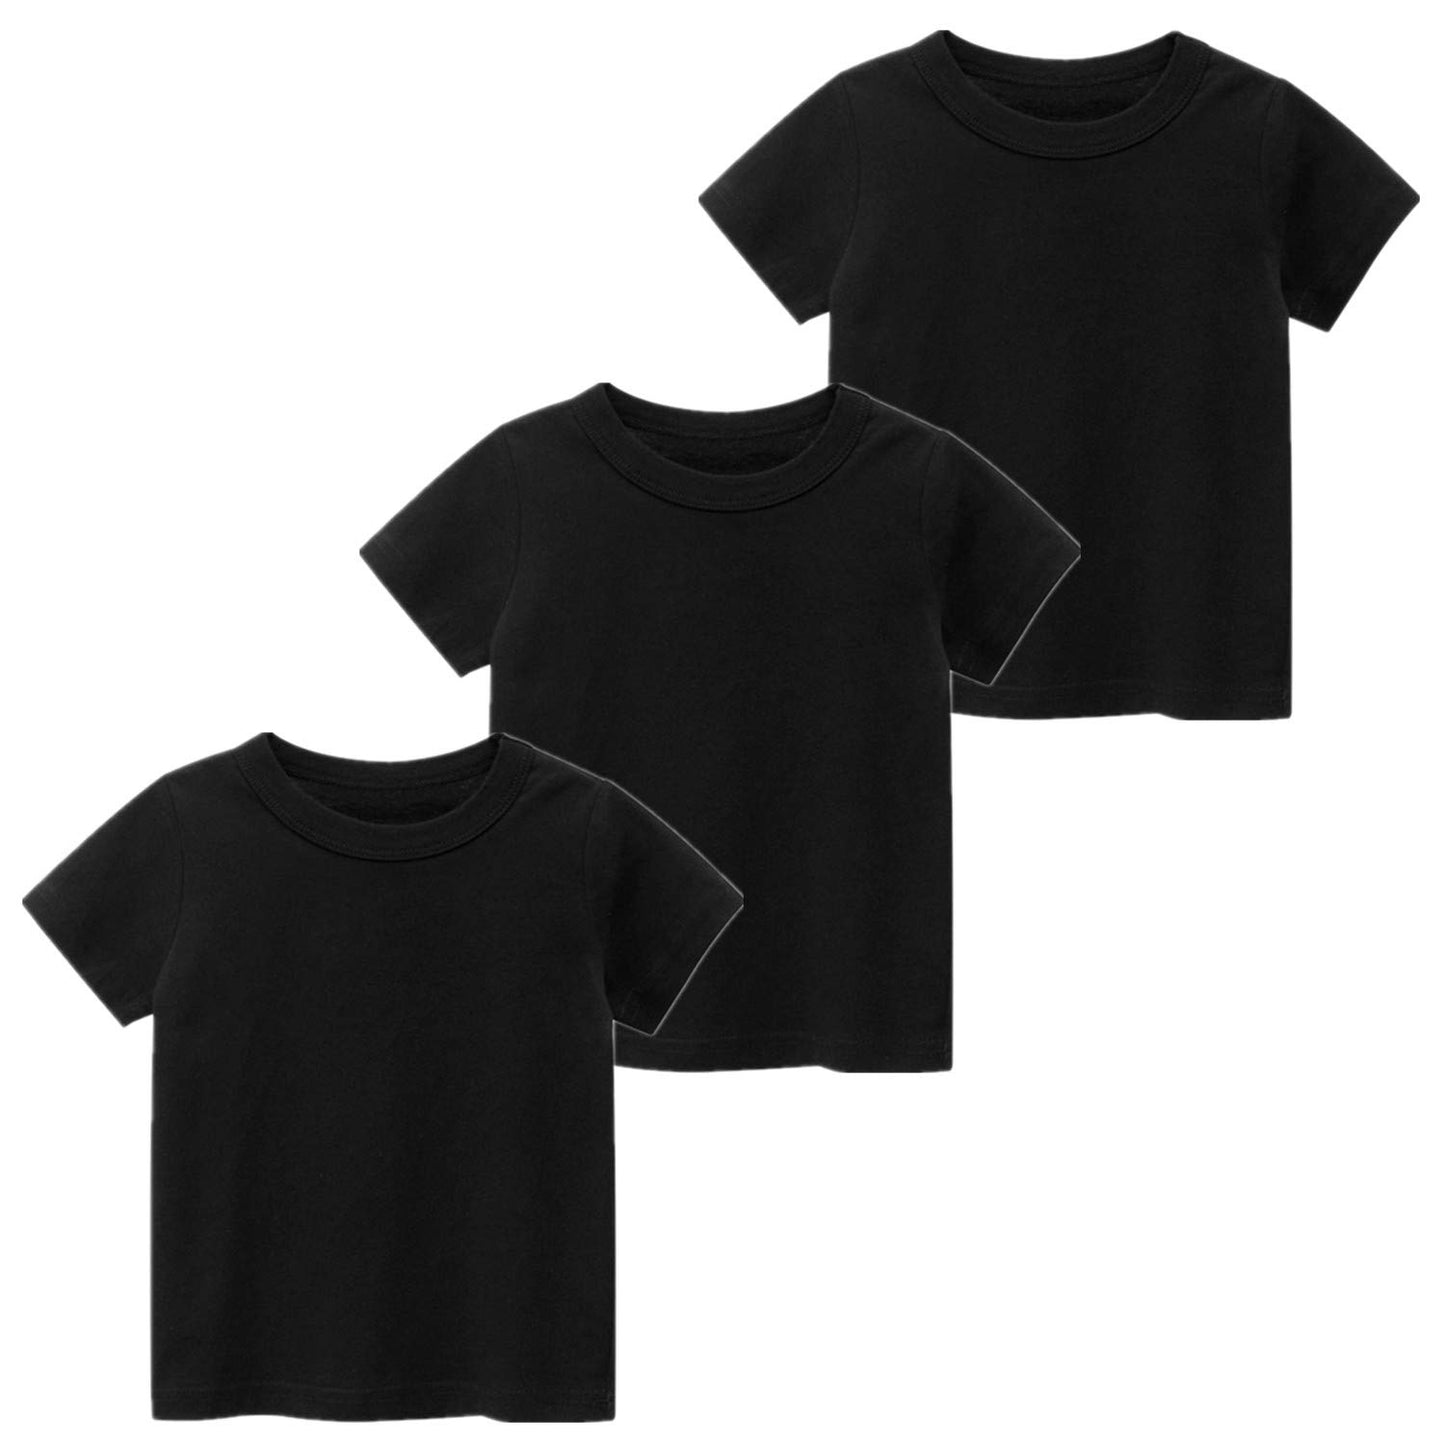 JUNOAI Kids Toddler Boys Short Sleeve Crewneck T-Shirts Top Tee Size for 2-7 Years (Pack of 3)